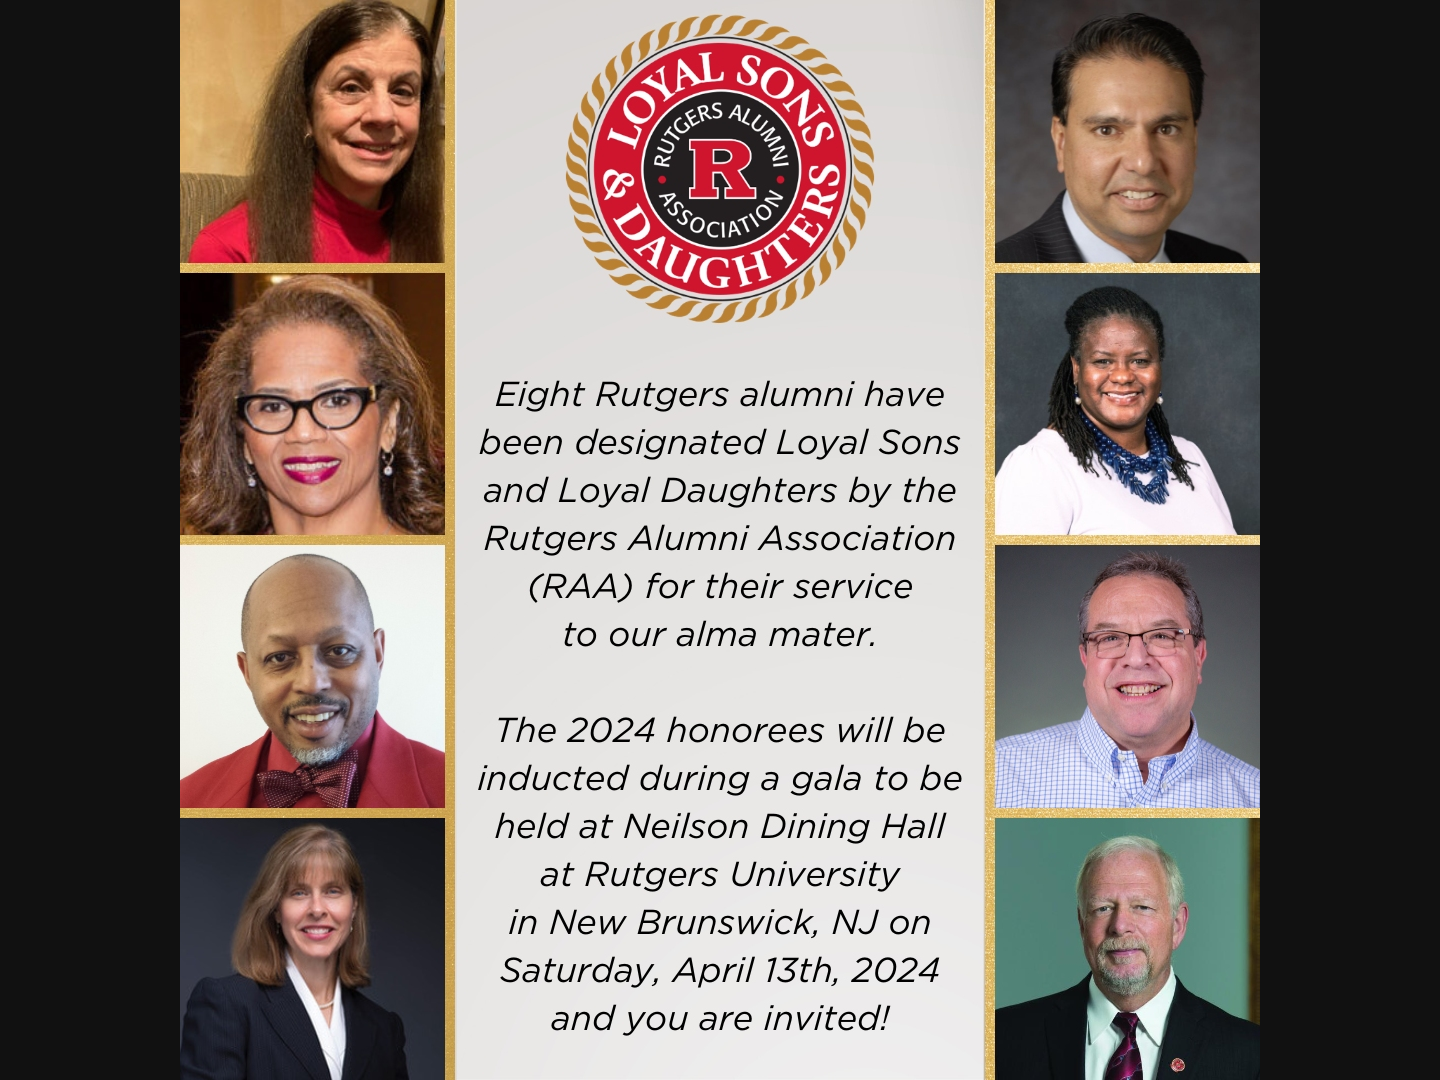 The honorees will be inducted during a “scarlet-tie” affair to be held at Neilson Dining Hall on the Cook / Douglass Campus of Rutgers University, New Brunswick, NJ on Saturday, April 13, 2024.